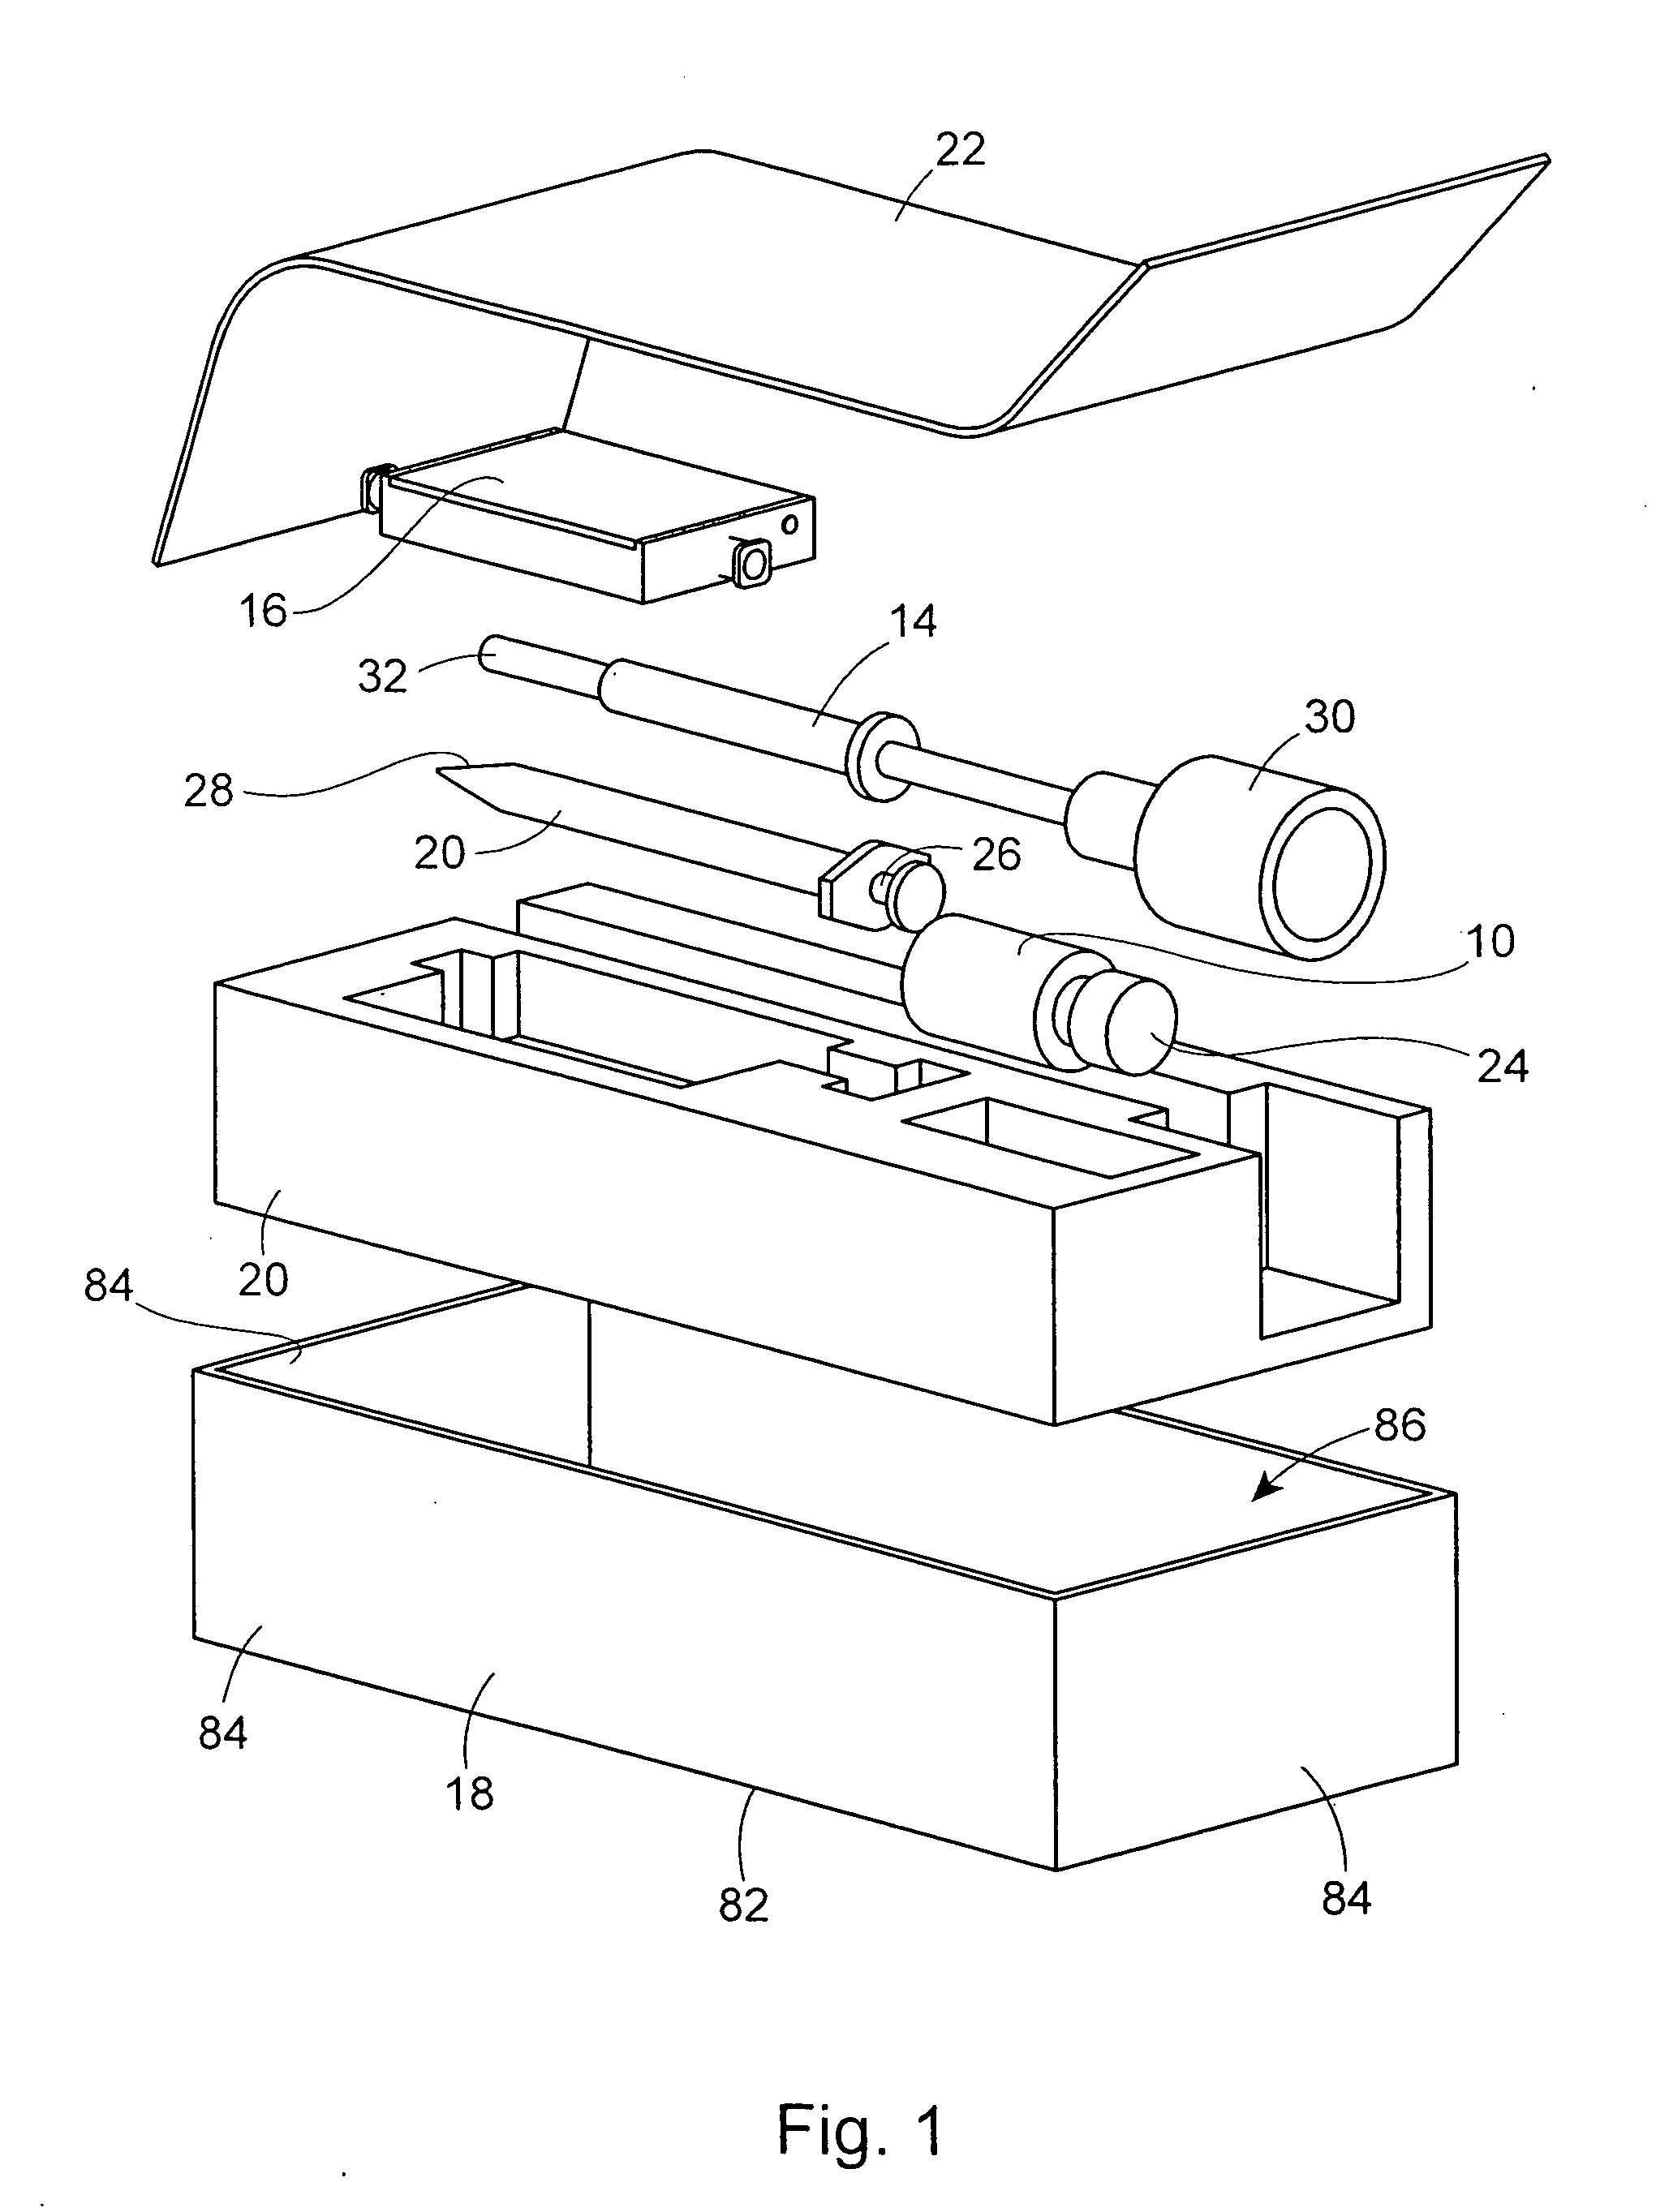 Apparatus and method for reconstituting a pharmaceutical and preparing the reconstituted pharmaceutical for transient application